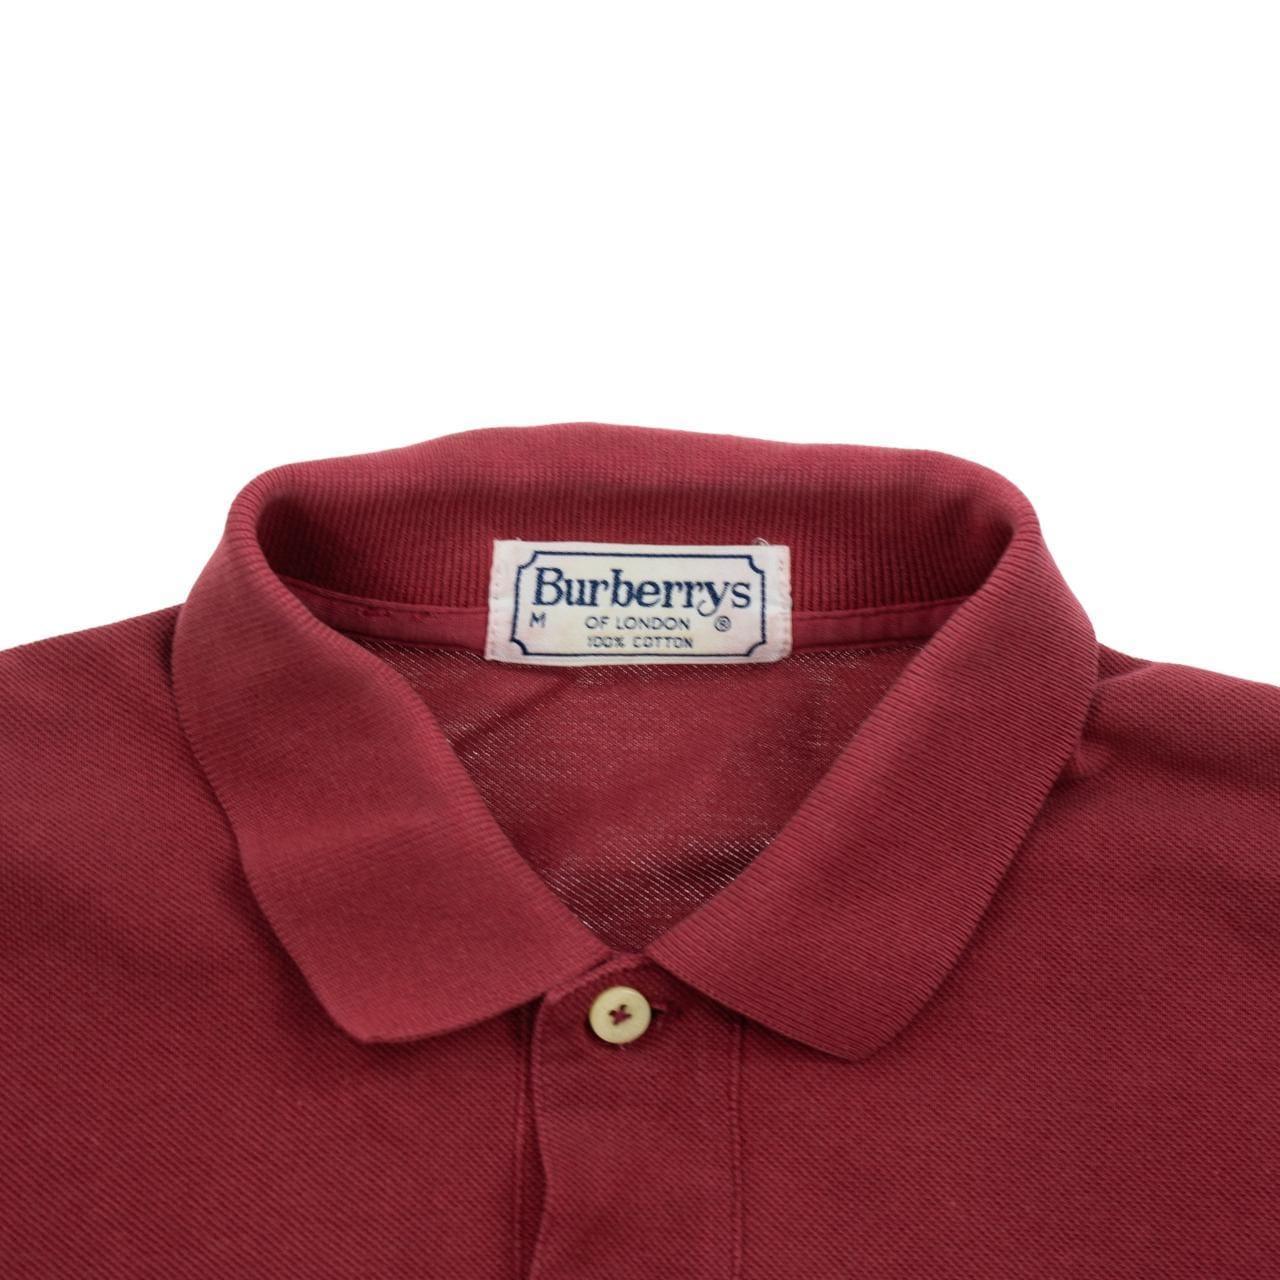 Vintage Burberry Long Sleeve Polo Shirt Size S - Known Source